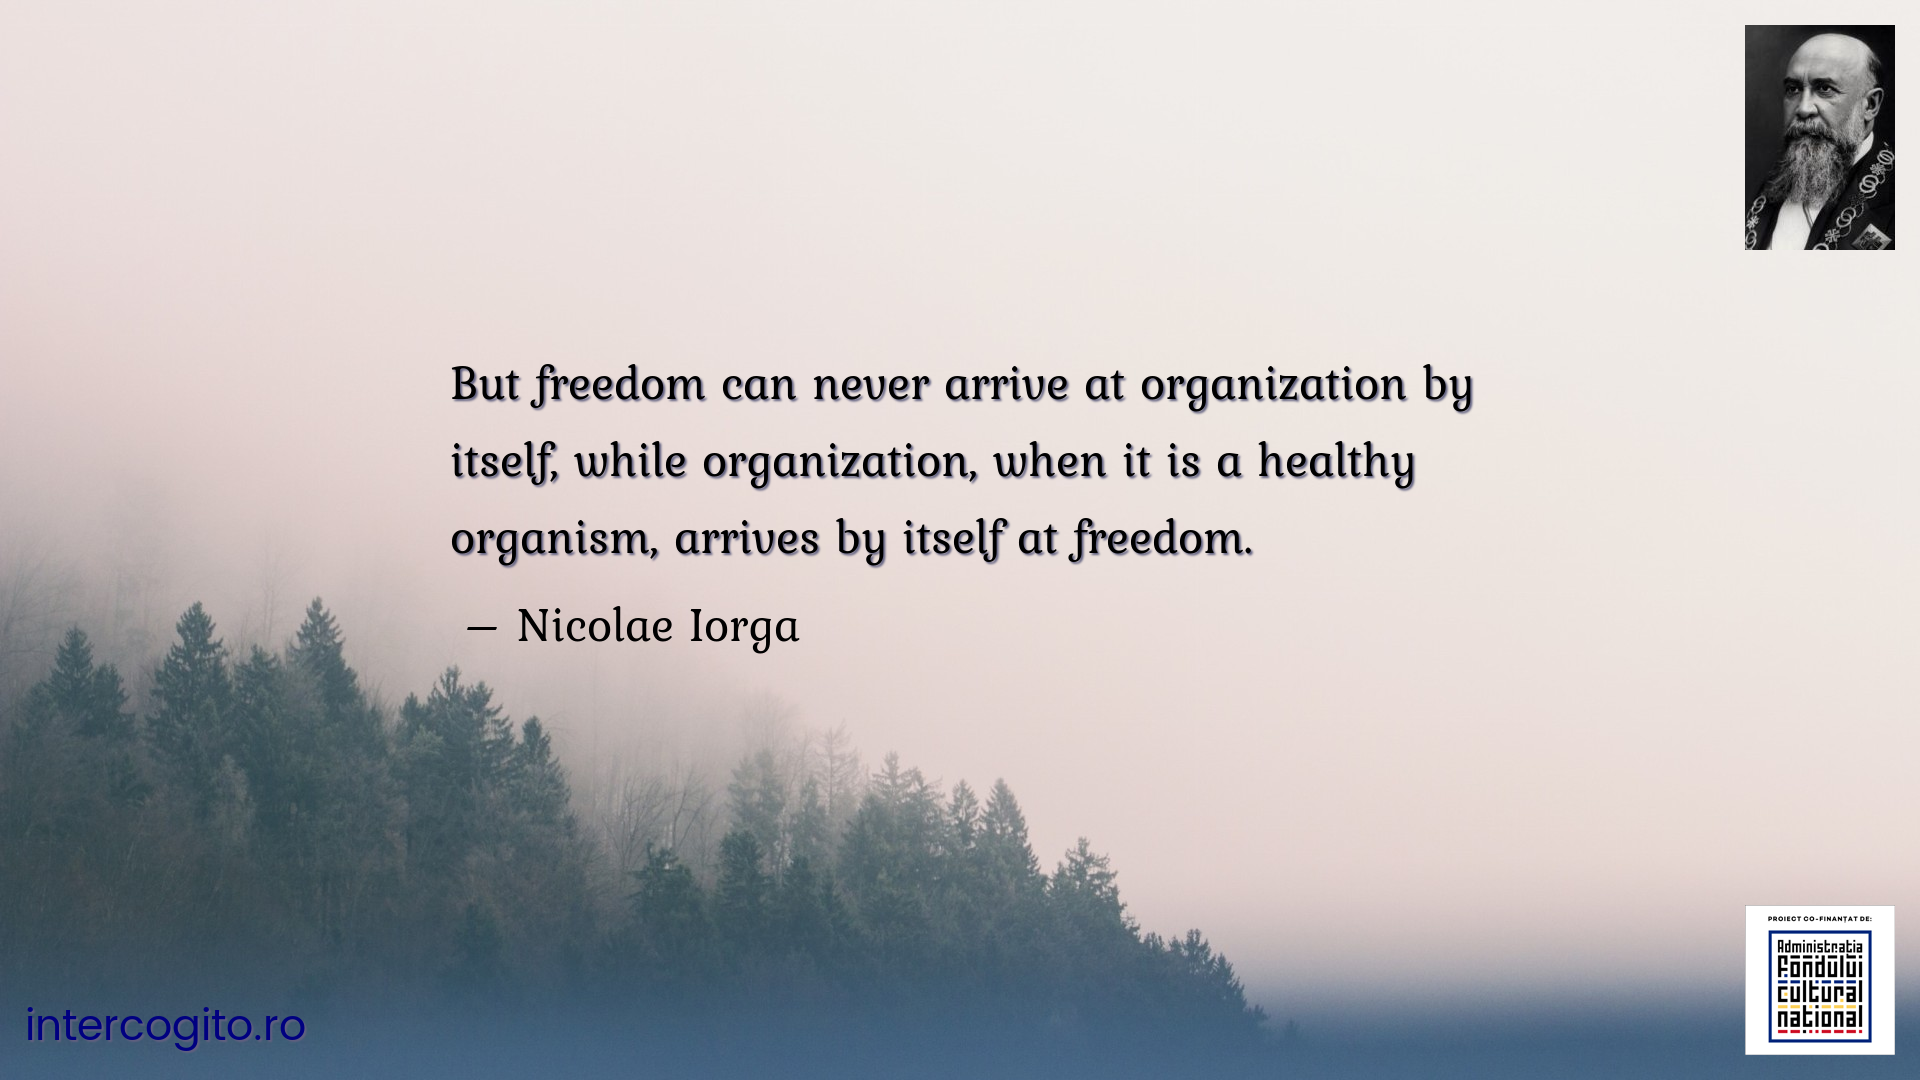 But freedom can never arrive at organization by itself, while organization, when it is a healthy organism, arrives by itself at freedom.